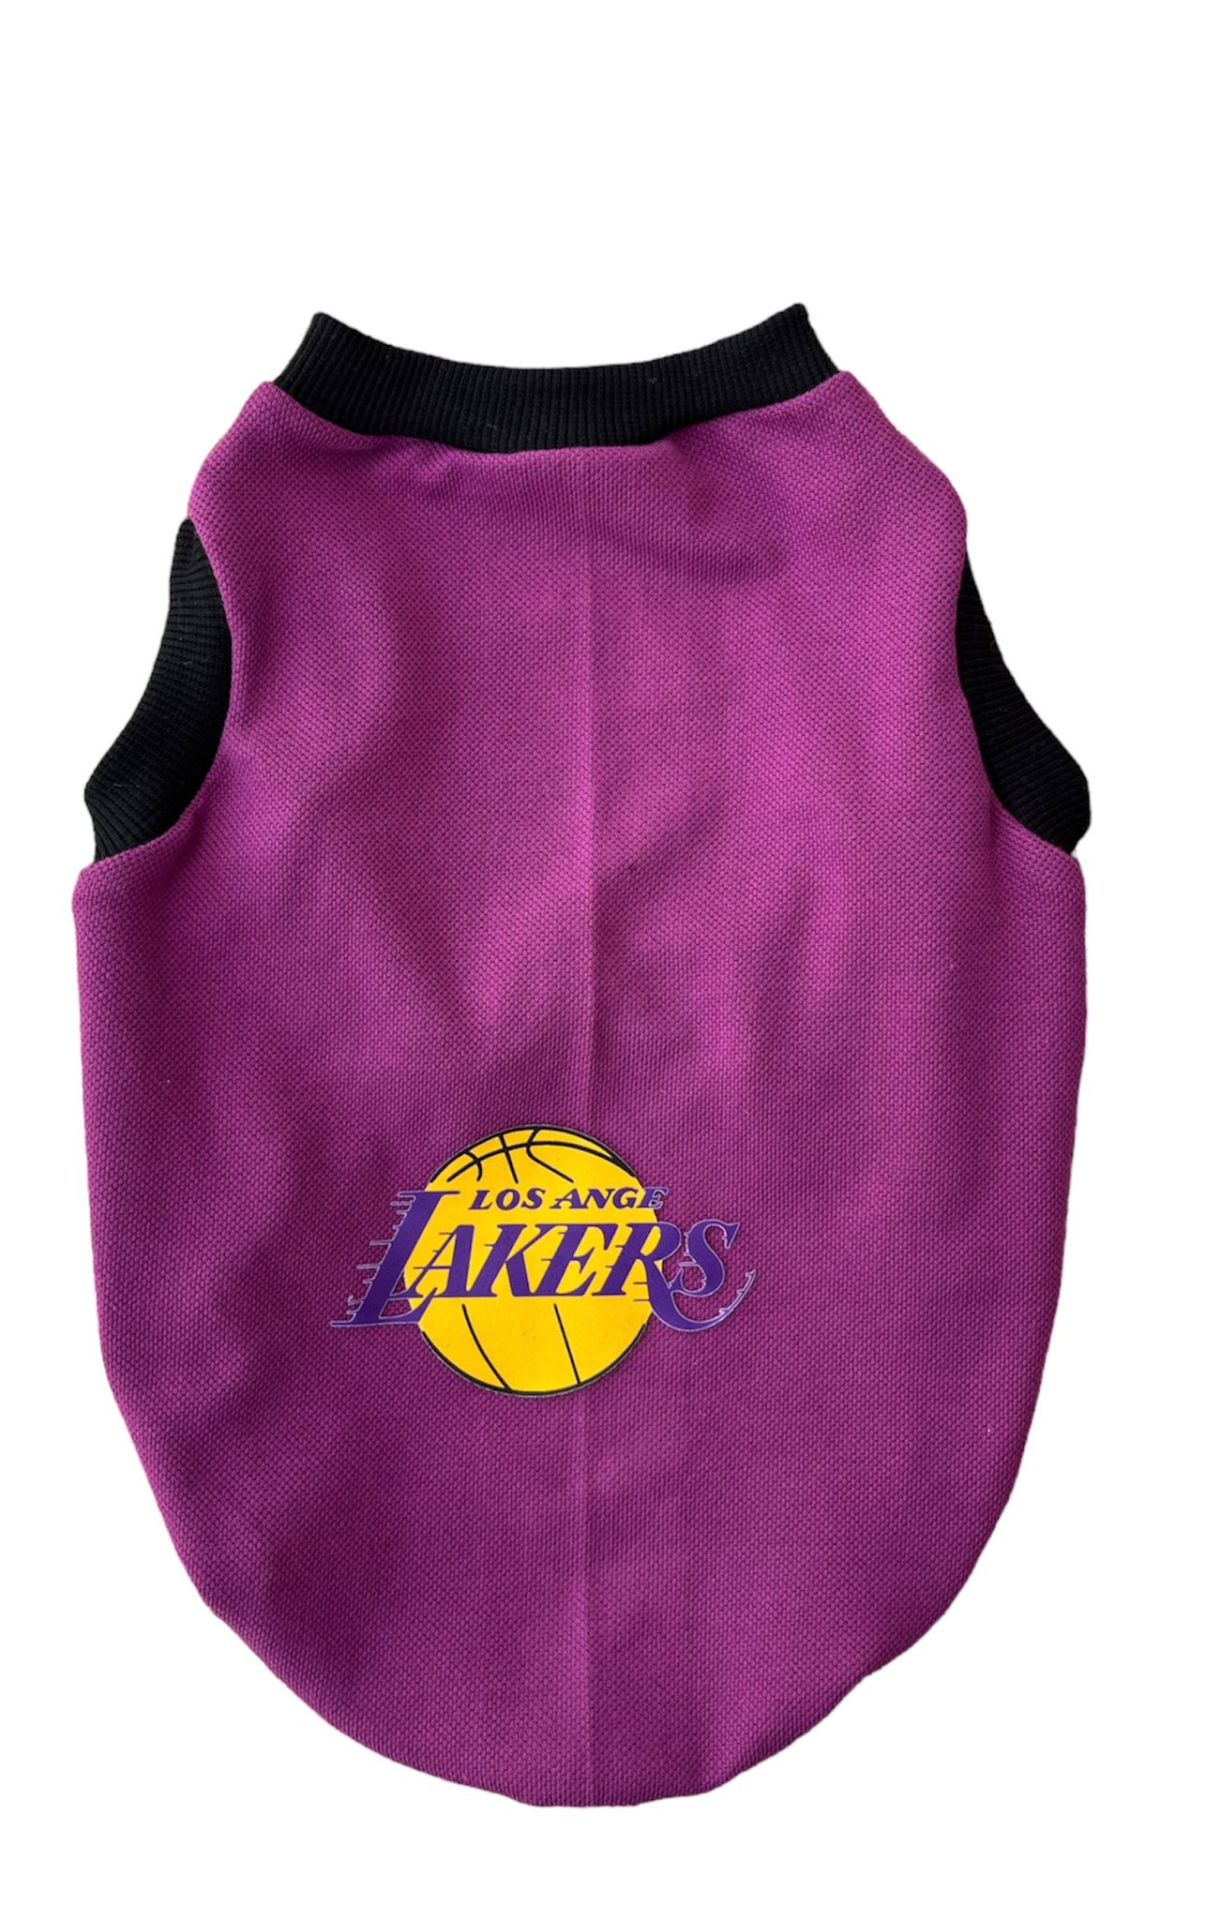 lakers atlet